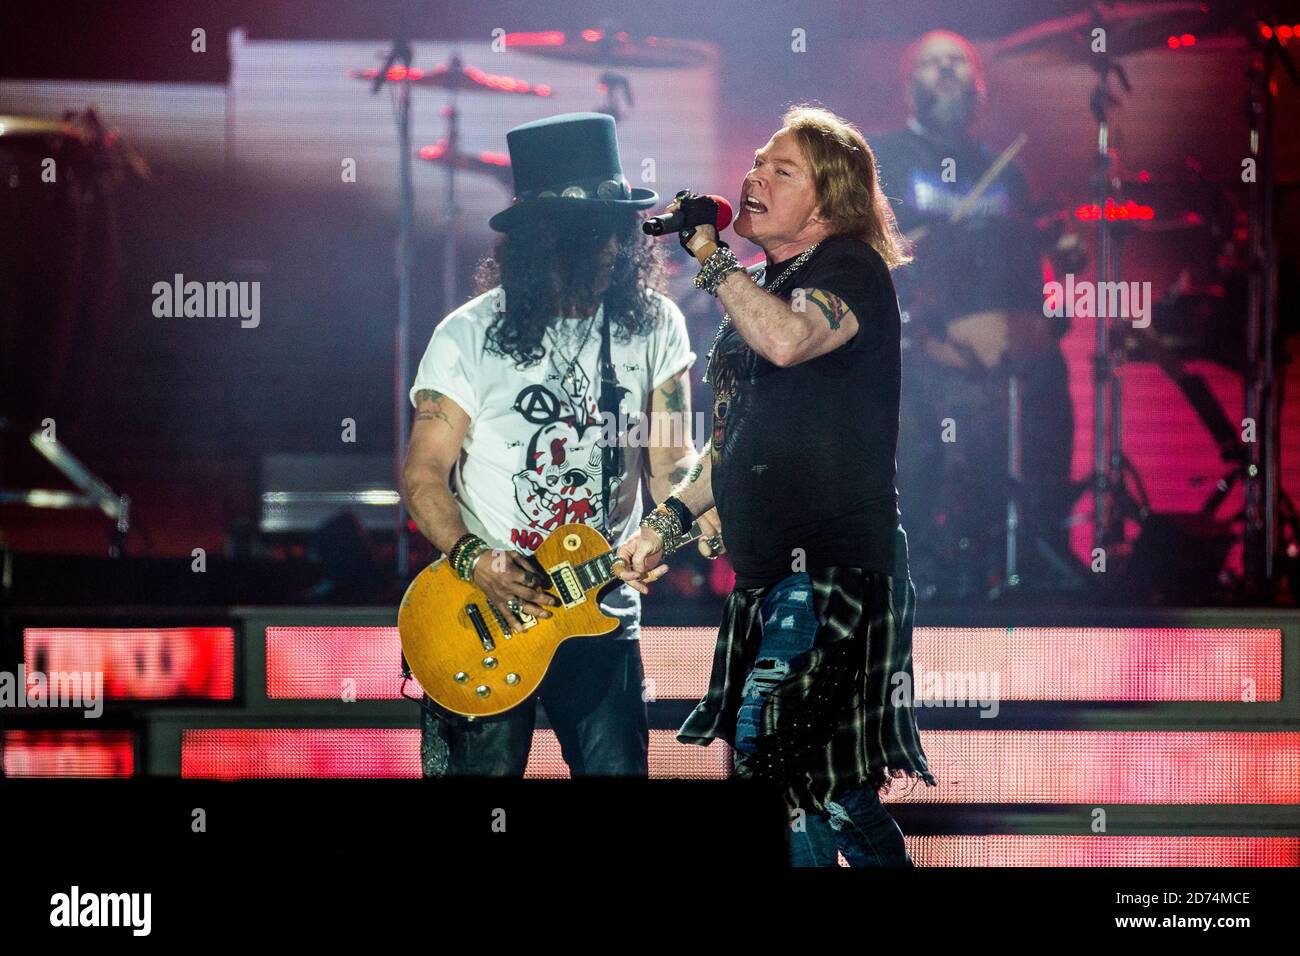 Copenhagen, Denmark. 27th, June 2017. The American rock band Guns N' Roses  performs a live concert at Telia Parken in Copenhagen. Here vocalist Axl  Rose is seen live on stage with guitarist